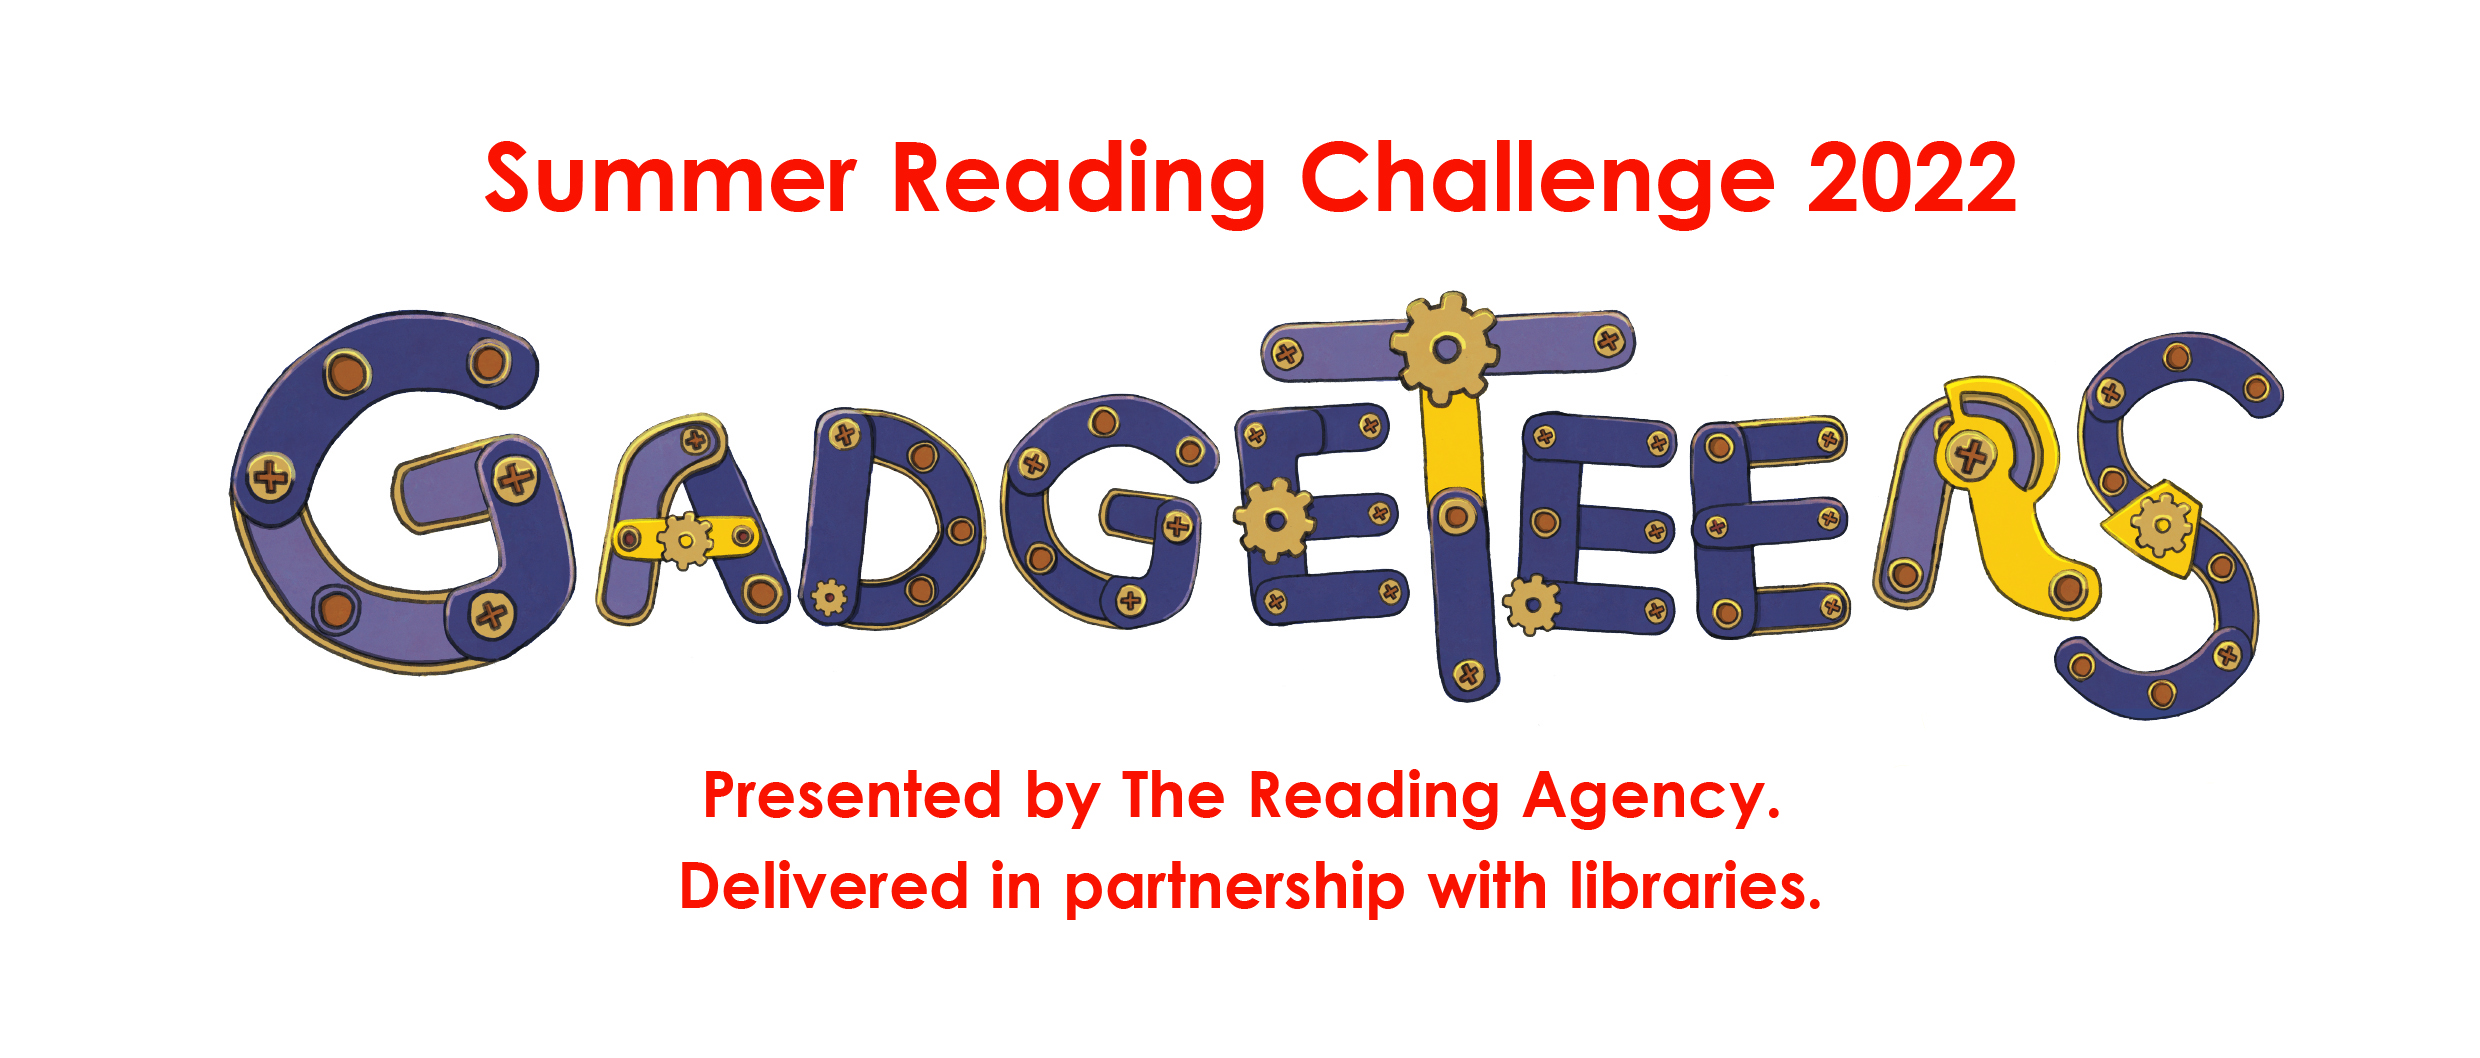 Summer Reading Challenge 2022. Gadgeteers. Presented by The Reading Agency. Delivered in partnership with libraries.